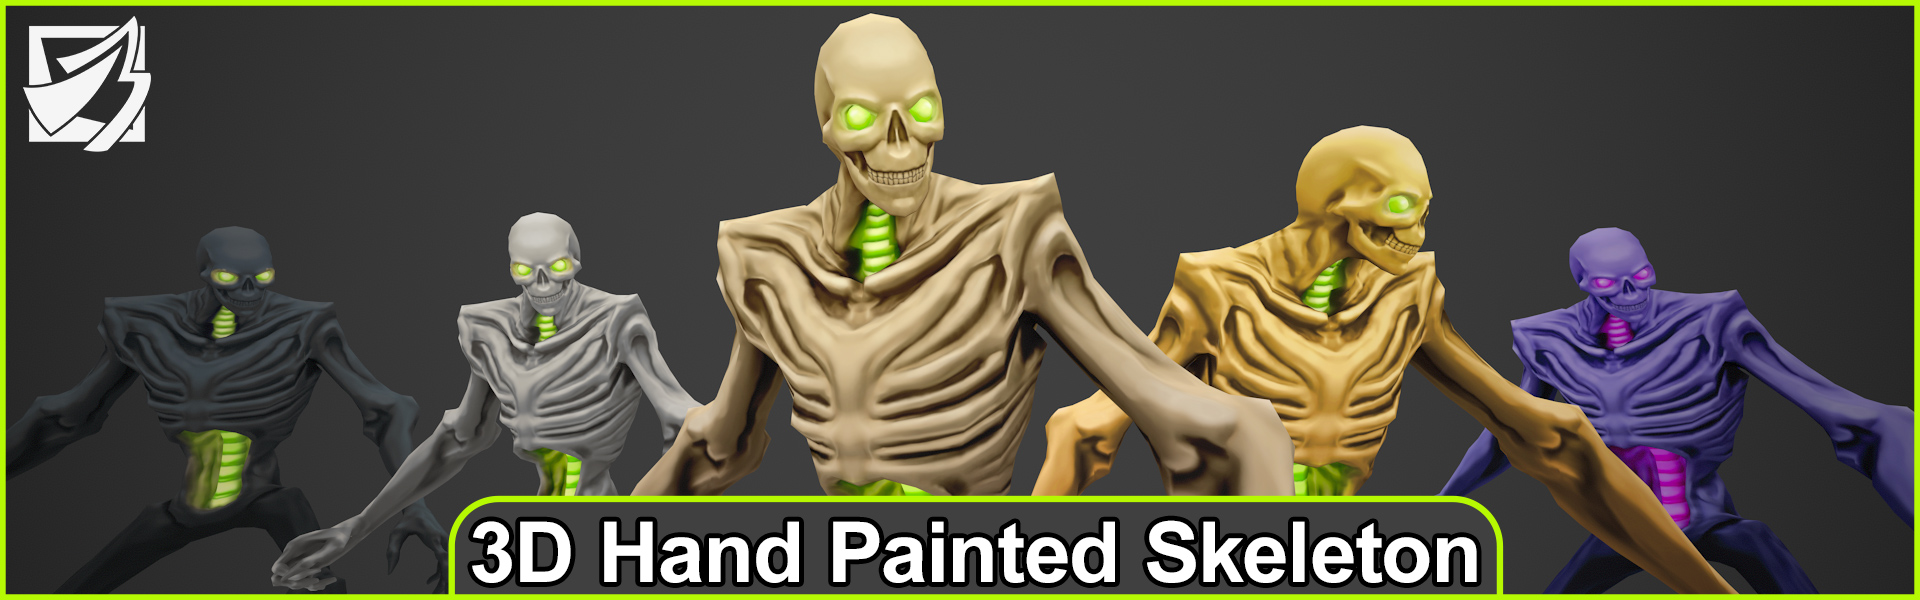 3D Hand Painted Skeleton